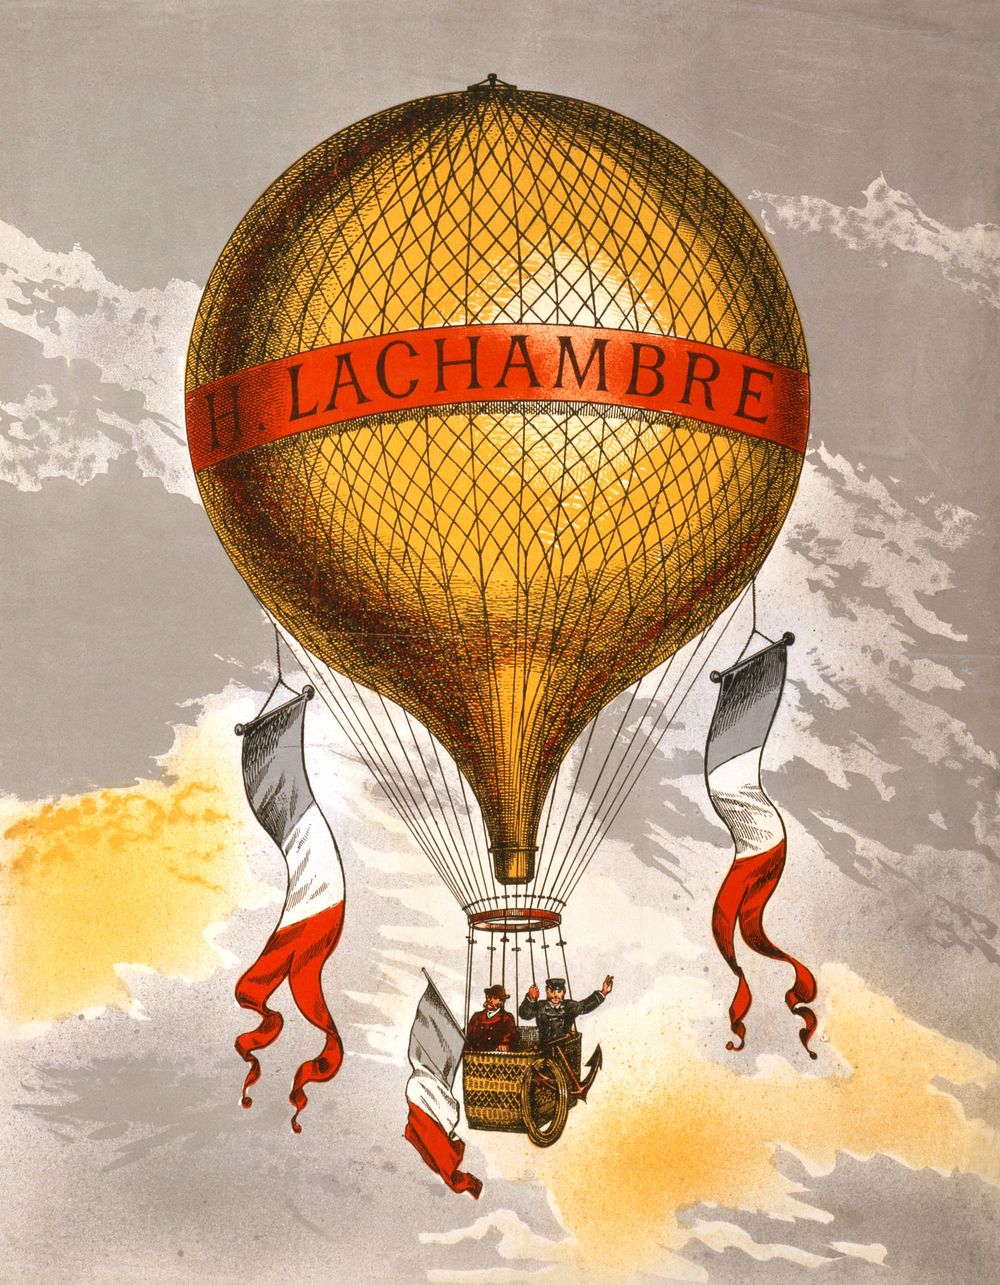 Balloon labeled "H. Lachambre," with two men riding in the basket (1880). Original public domain image from the Library of…